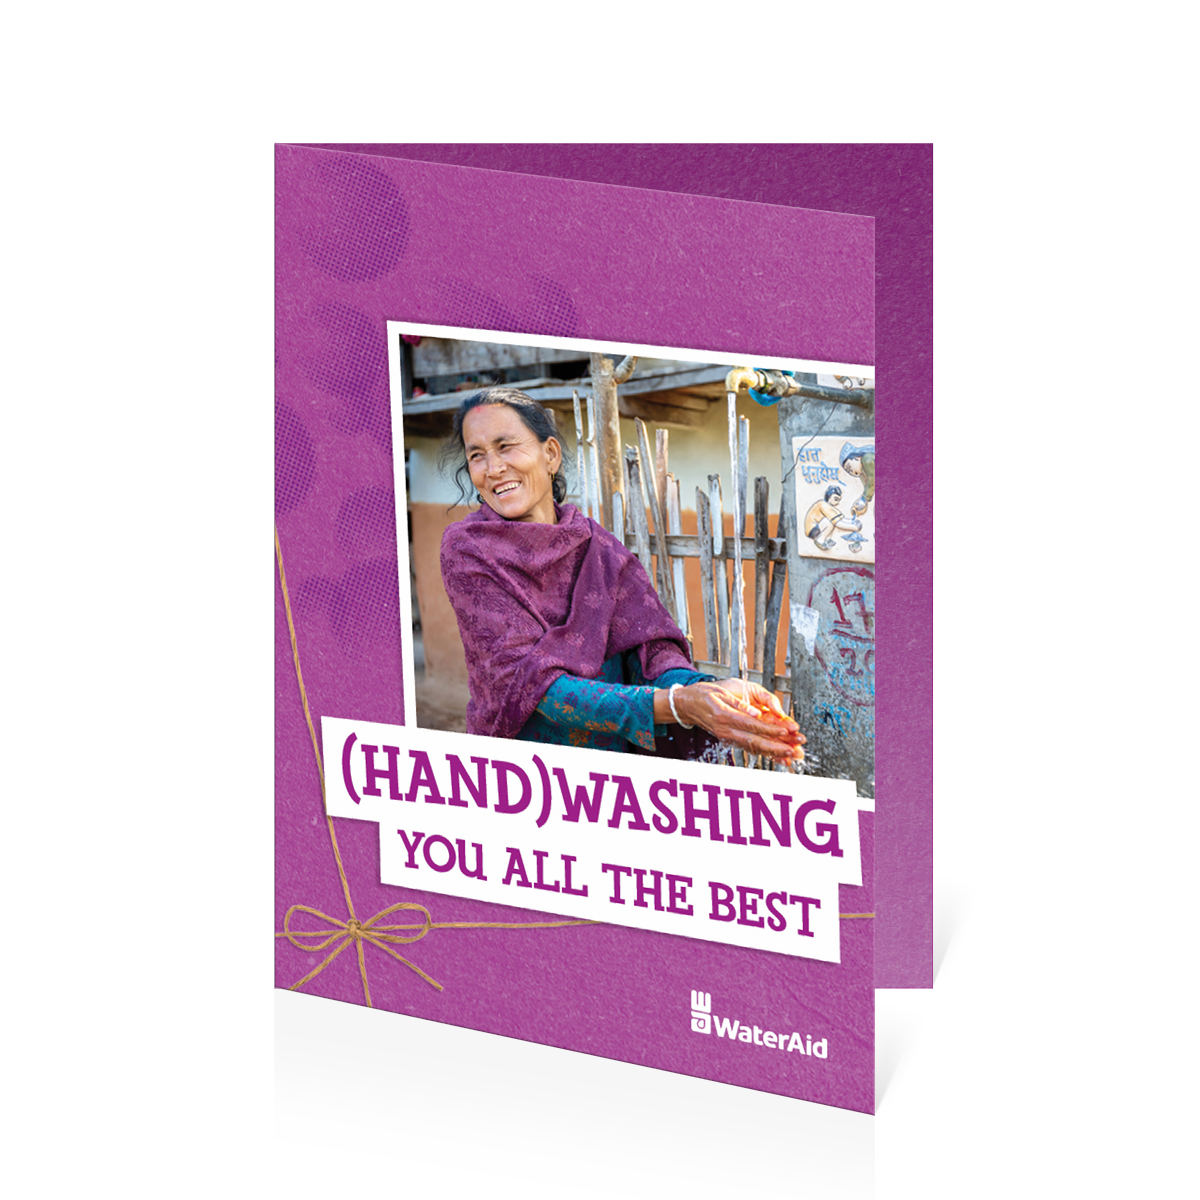 $30 can help build a simple handwashing station